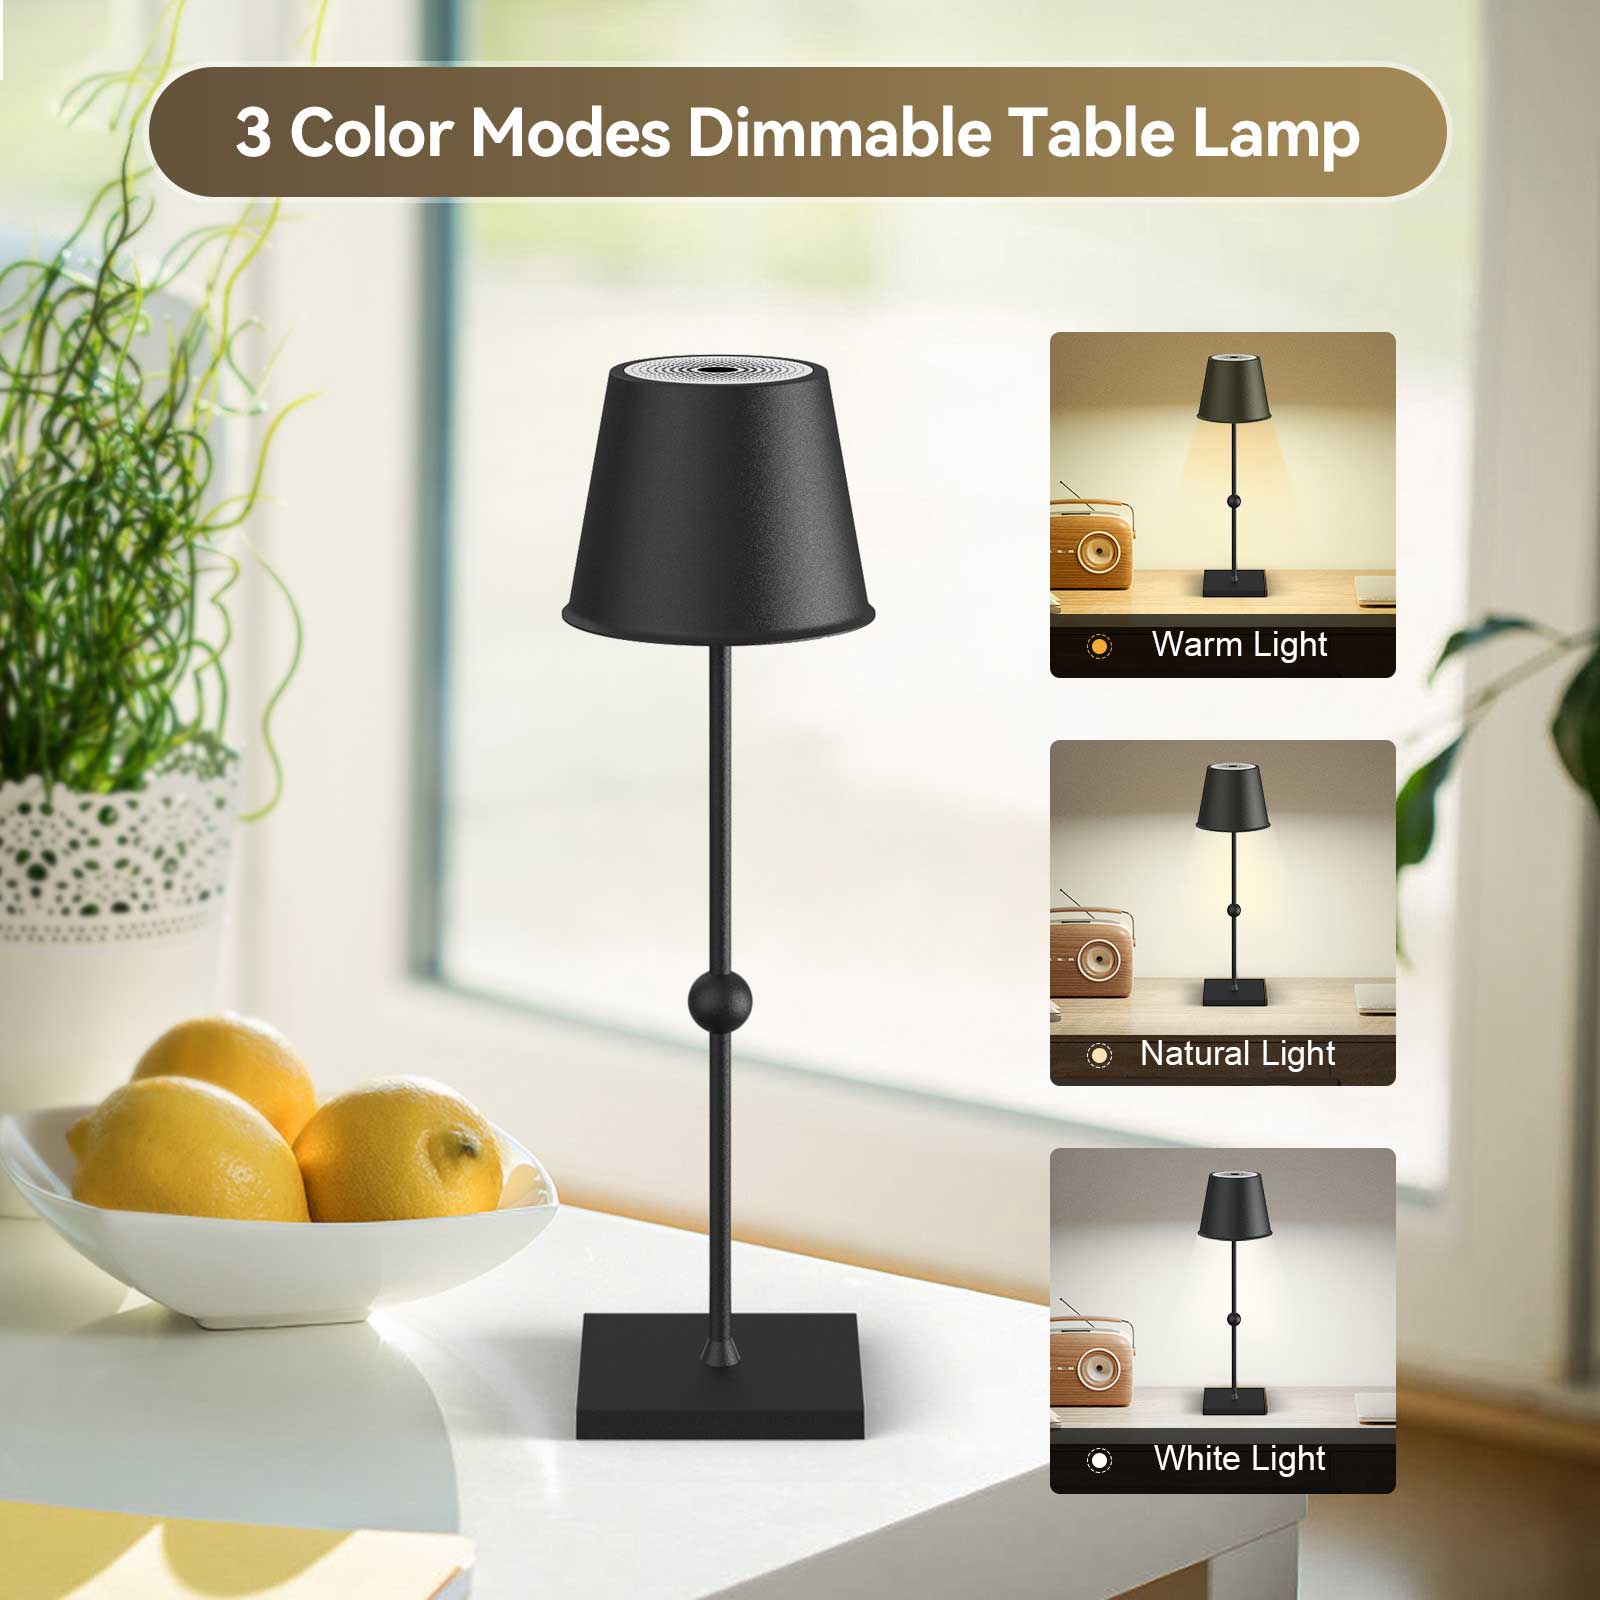 Huiveoo 3 Color Modes Dimmable Table Lamp Silva-A black